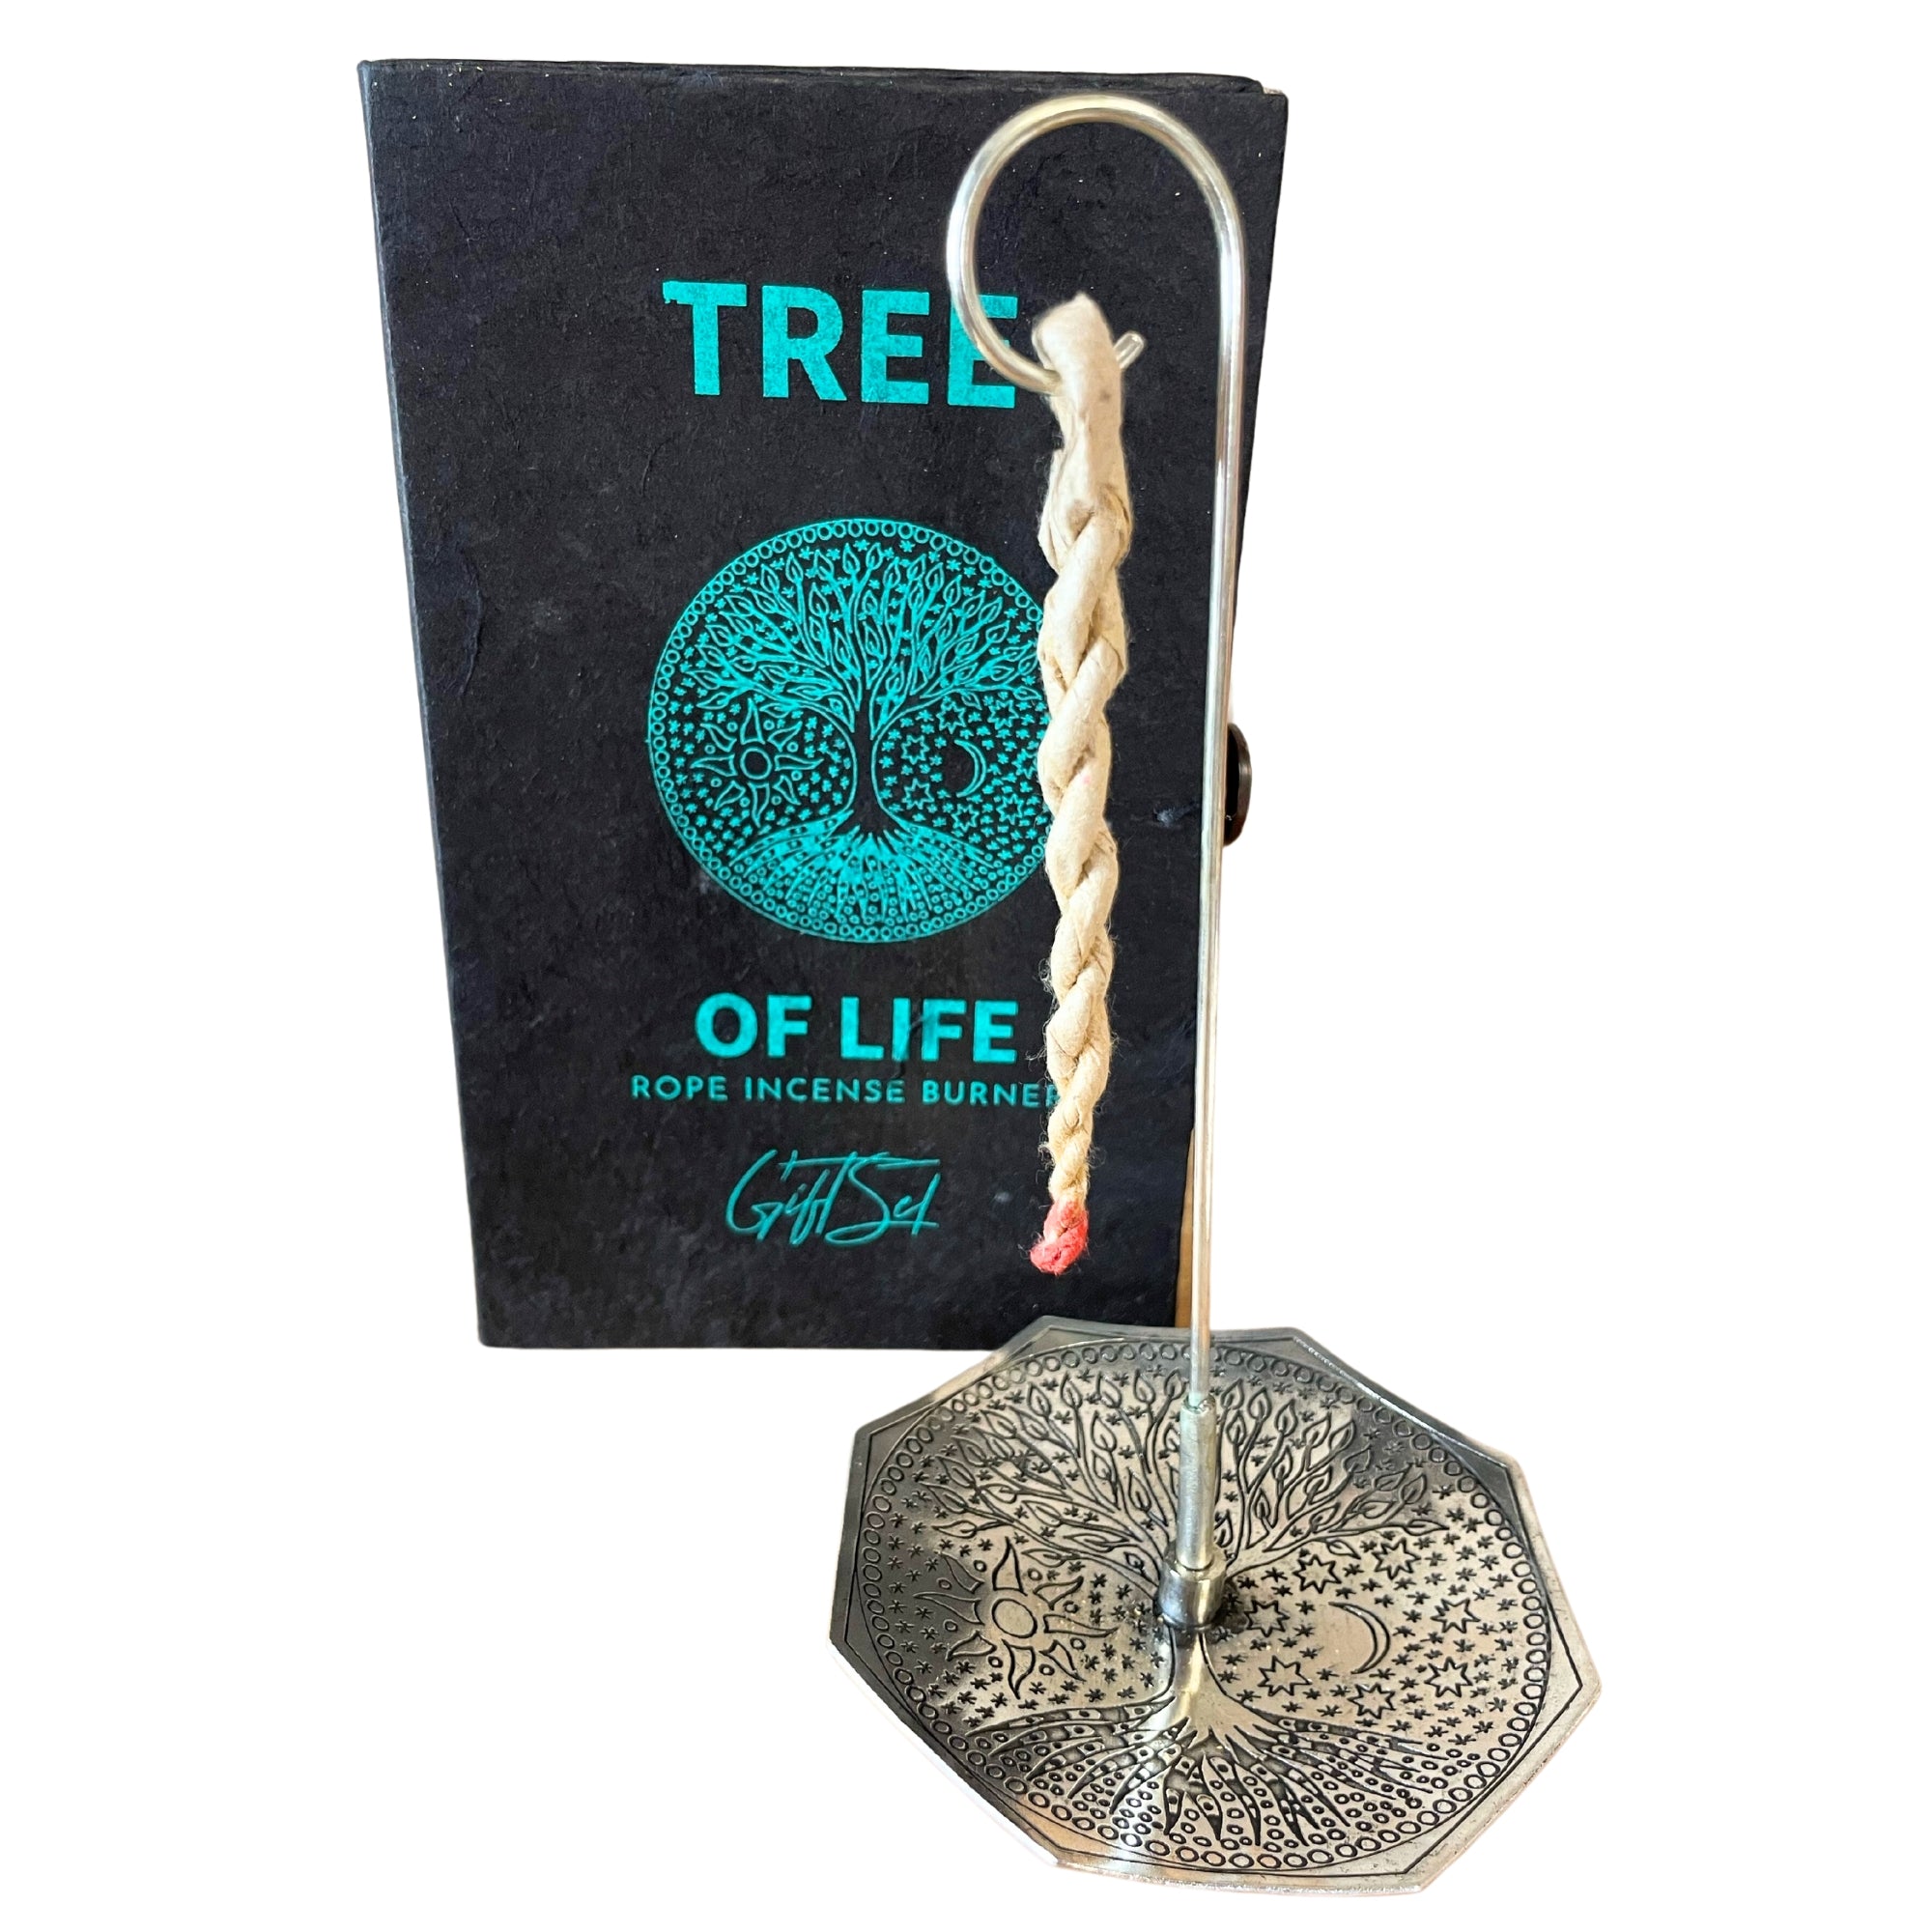 View Rope Incense and Silver Plated Holder Set Tree of Life information